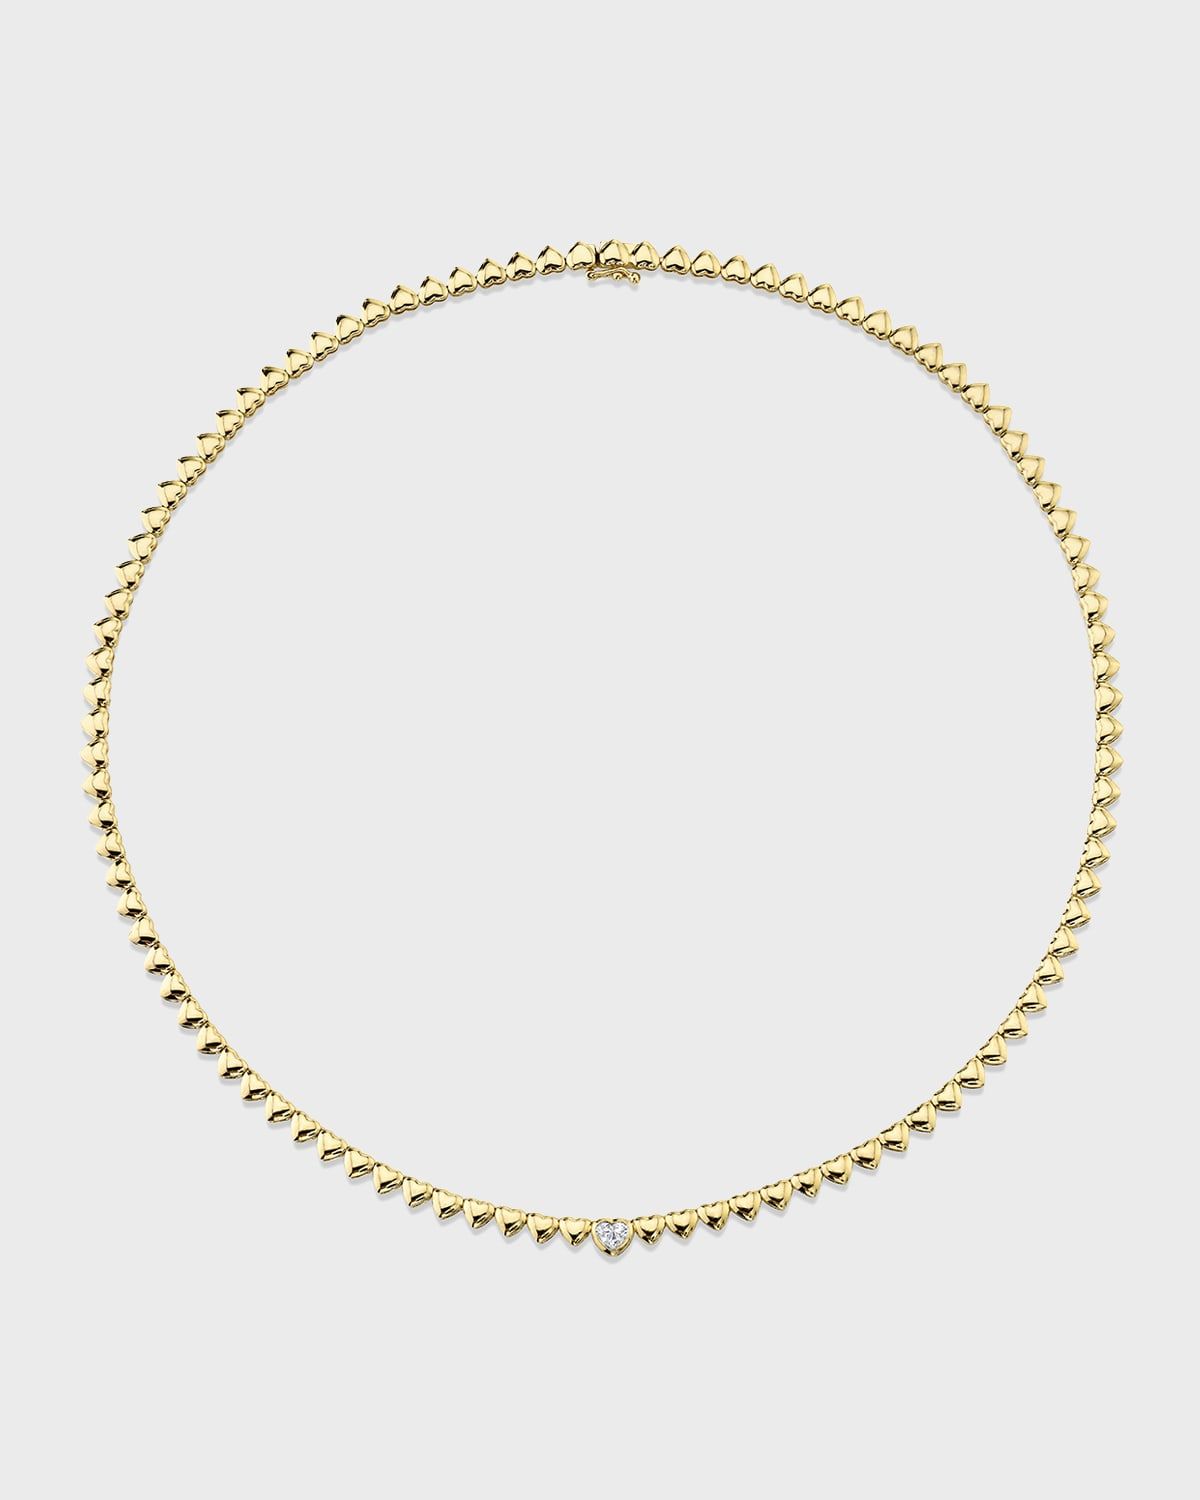 18k Yellow Gold Small Heart Necklace with One Diamond | Neiman Marcus